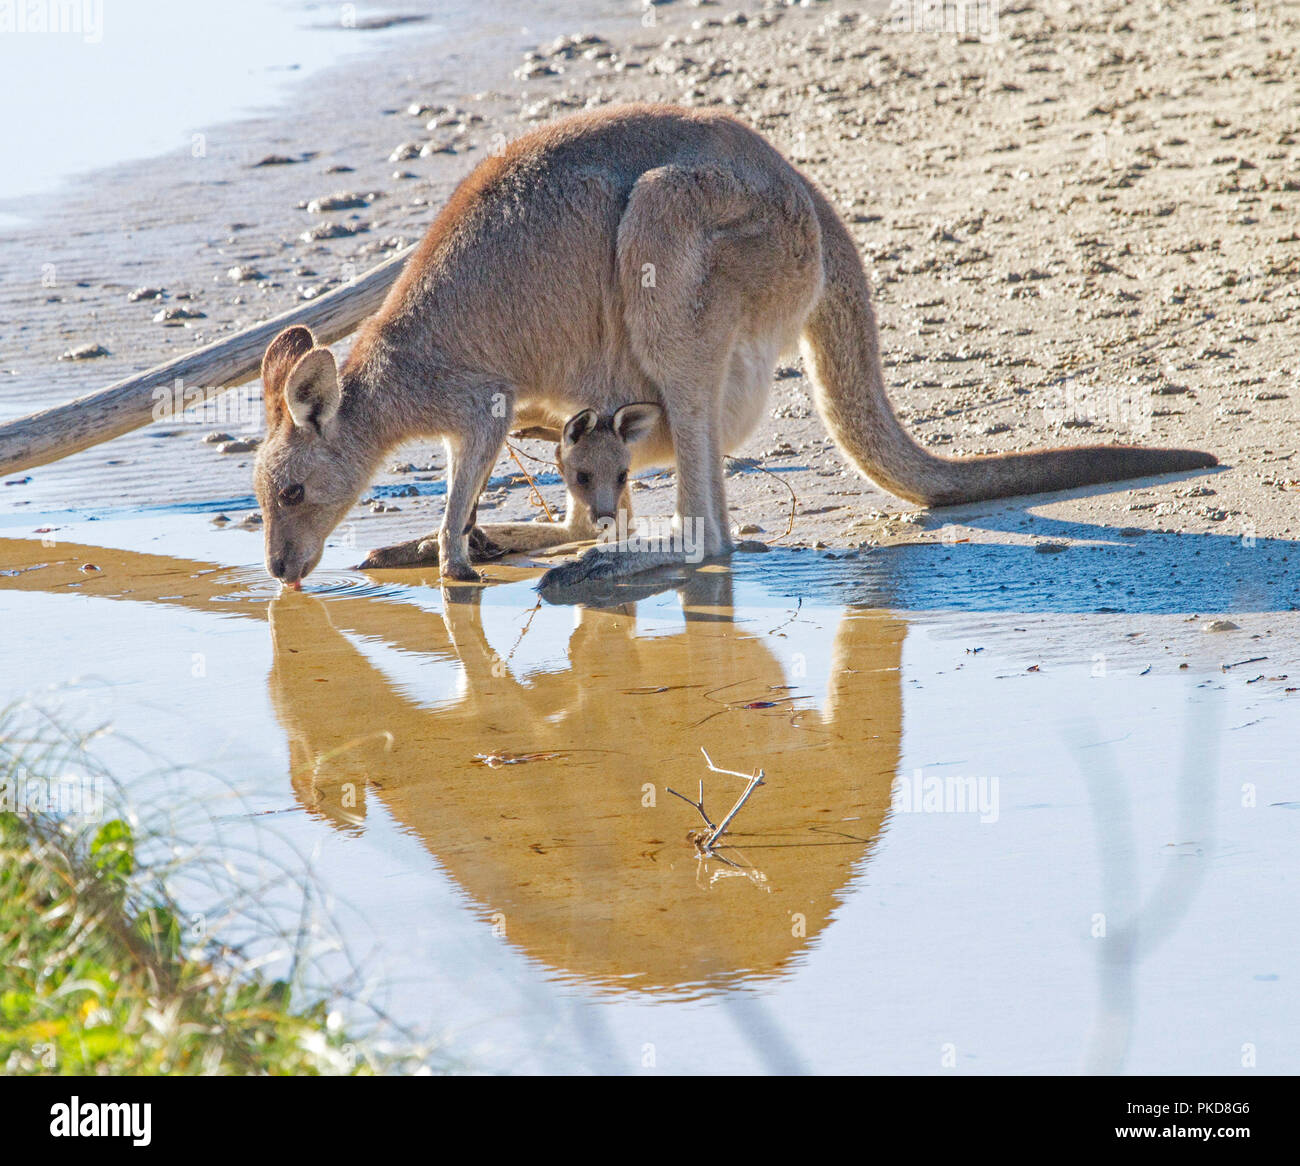 Female eastern grey kangaroo drinking from & reflected in coastal stream with joey leaning out of pouch - in the wild in tNSW Australia Stock Photo